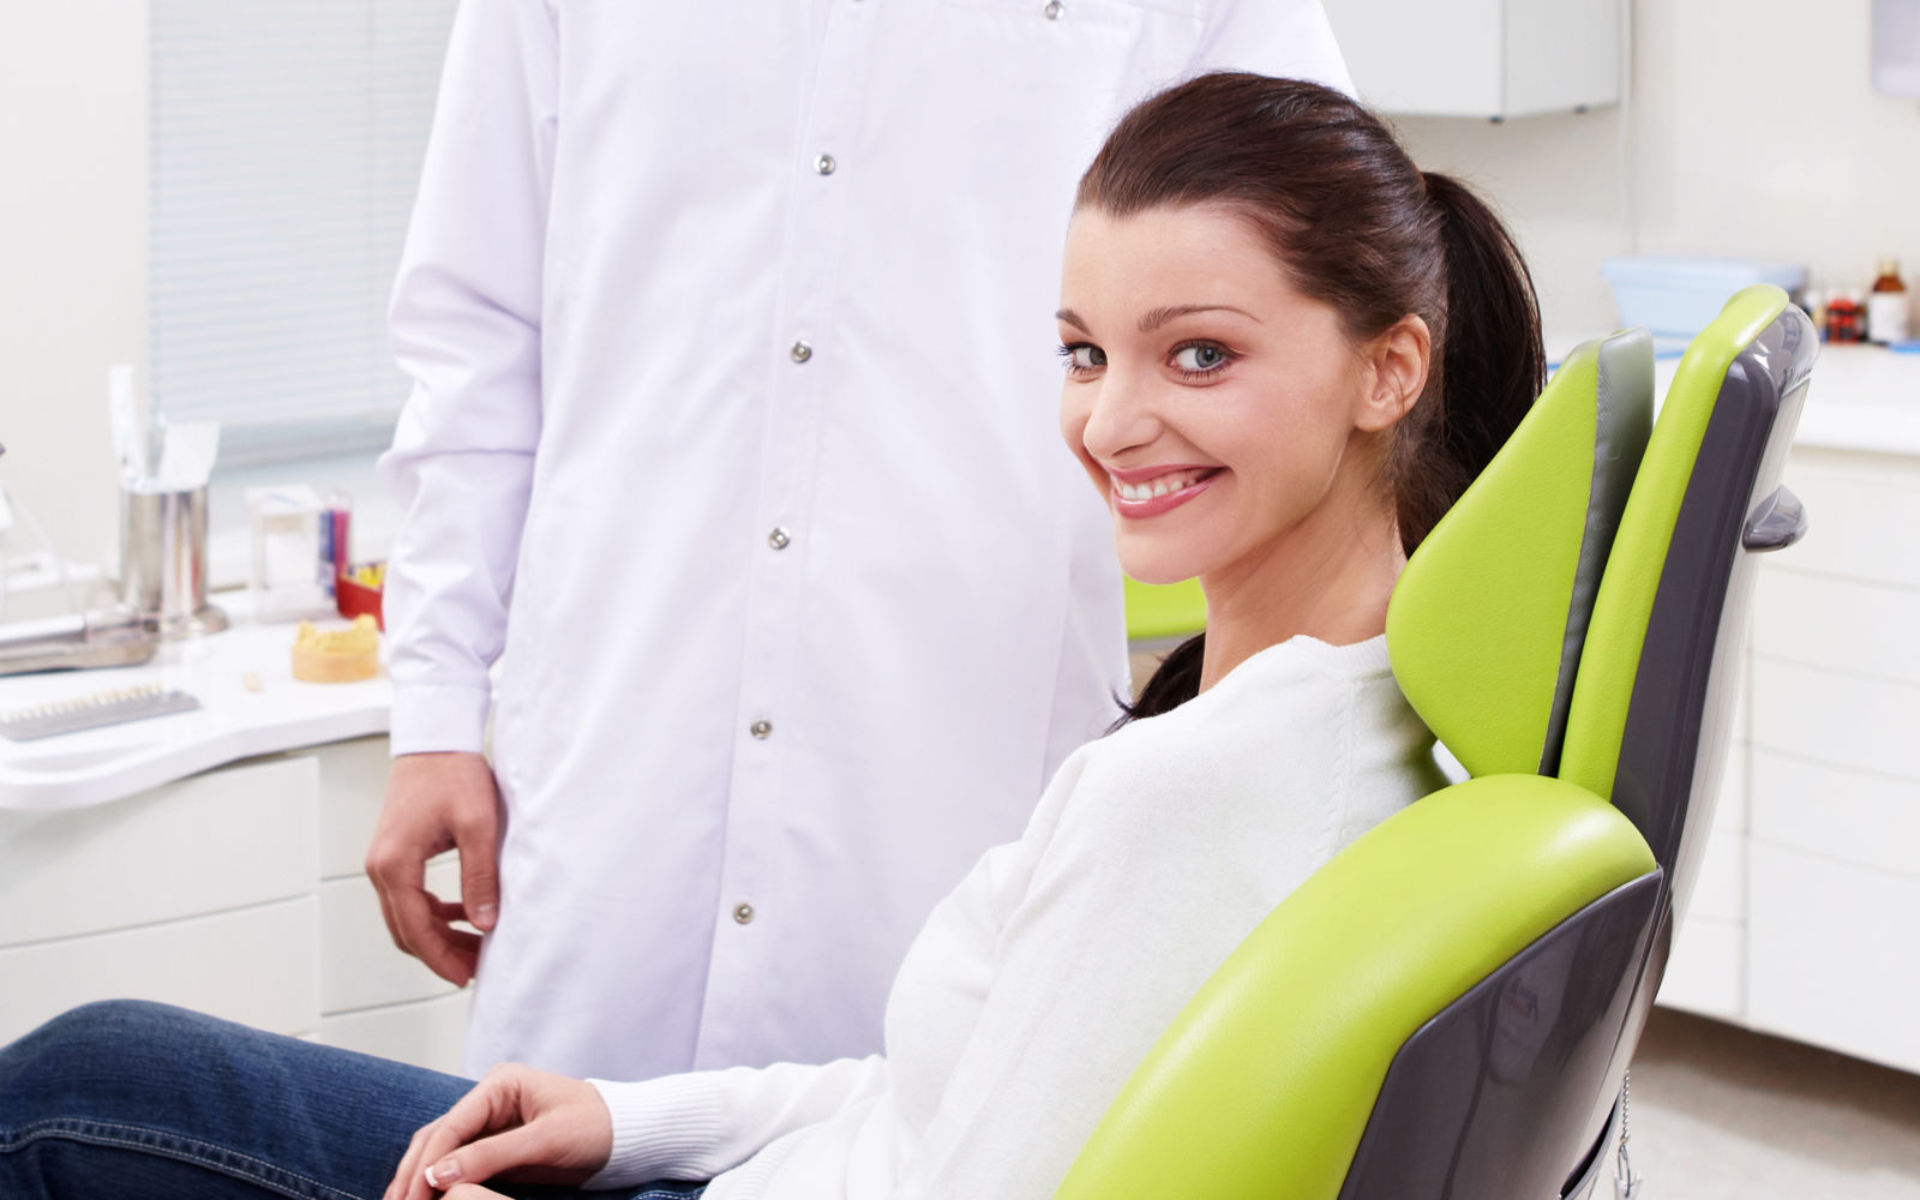 A dentist and a smiling woman sitting in a dental chair.